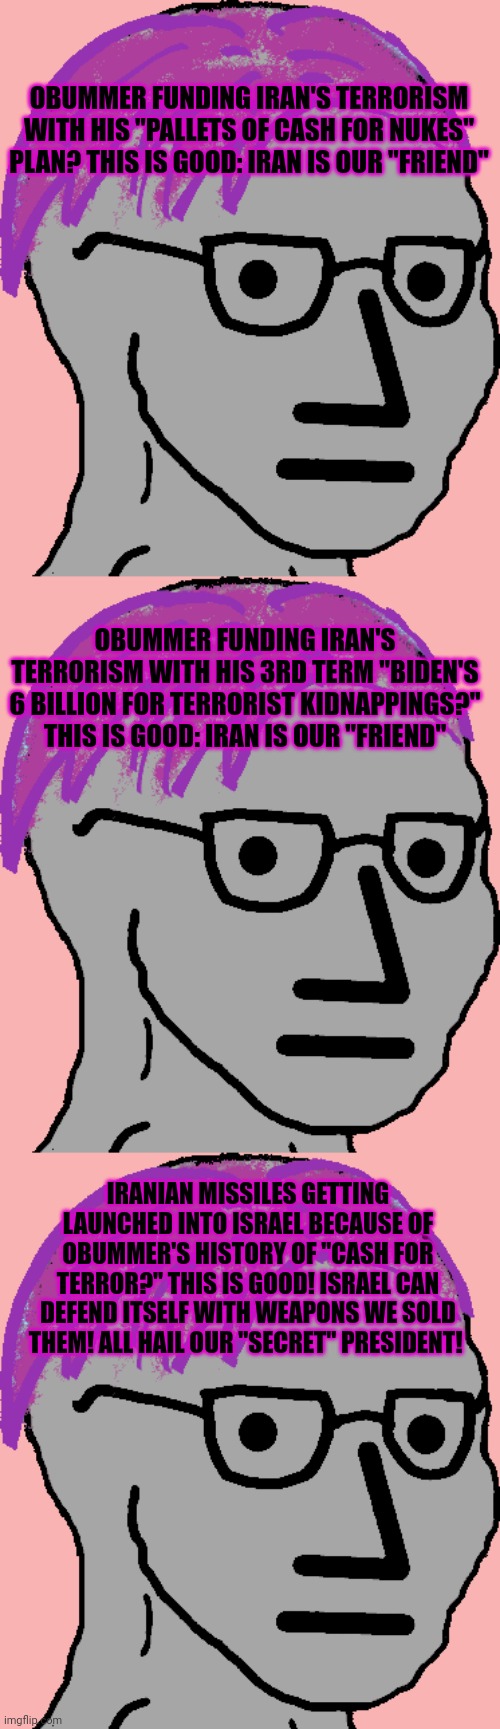 Liberal logic. | OBUMMER FUNDING IRAN'S TERRORISM WITH HIS "PALLETS OF CASH FOR NUKES" PLAN? THIS IS GOOD: IRAN IS OUR "FRIEND"; OBUMMER FUNDING IRAN'S TERRORISM WITH HIS 3RD TERM "BIDEN'S 6 BILLION FOR TERRORIST KIDNAPPINGS?" THIS IS GOOD: IRAN IS OUR "FRIEND"; IRANIAN MISSILES GETTING LAUNCHED INTO ISRAEL BECAUSE OF OBUMMER'S HISTORY OF "CASH FOR TERROR?" THIS IS GOOD! ISRAEL CAN DEFEND ITSELF WITH WEAPONS WE SOLD THEM! ALL HAIL OUR "SECRET" PRESIDENT! | image tagged in liberal problems,liberal logic,iran,state sponsor of terror,obama medal | made w/ Imgflip meme maker